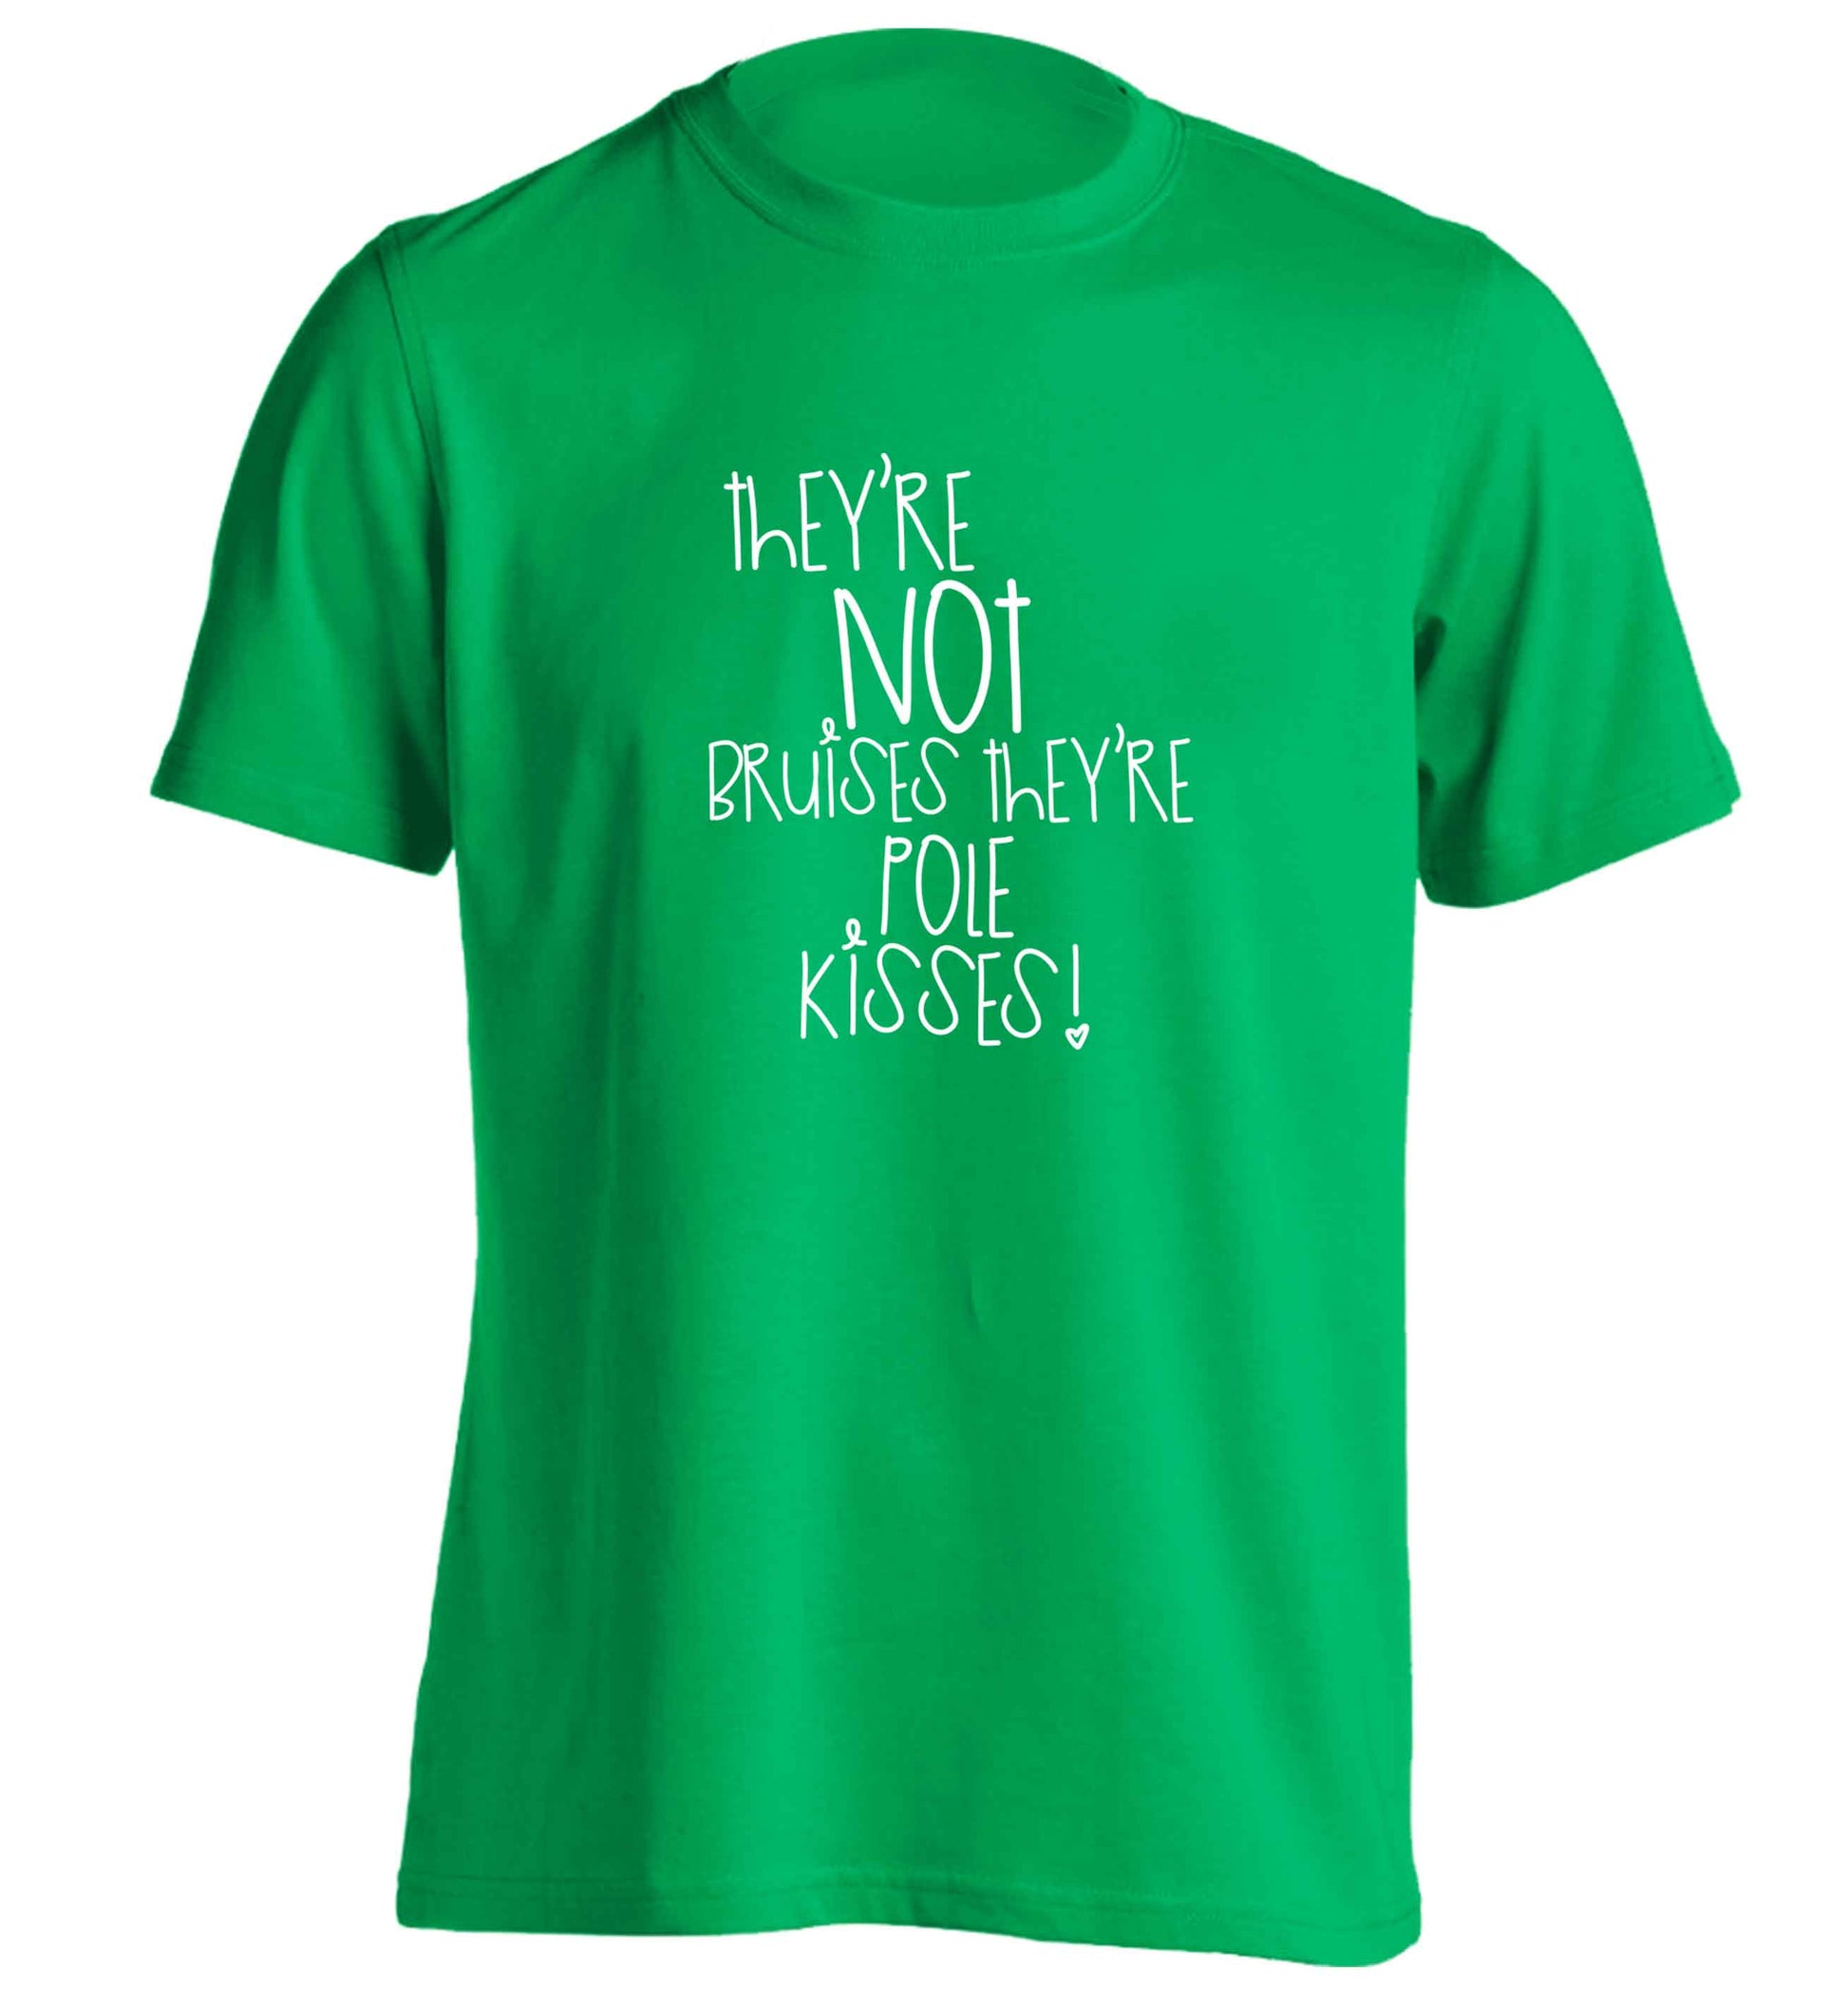 They're not bruises they're pole kisses adults unisex green Tshirt 2XL